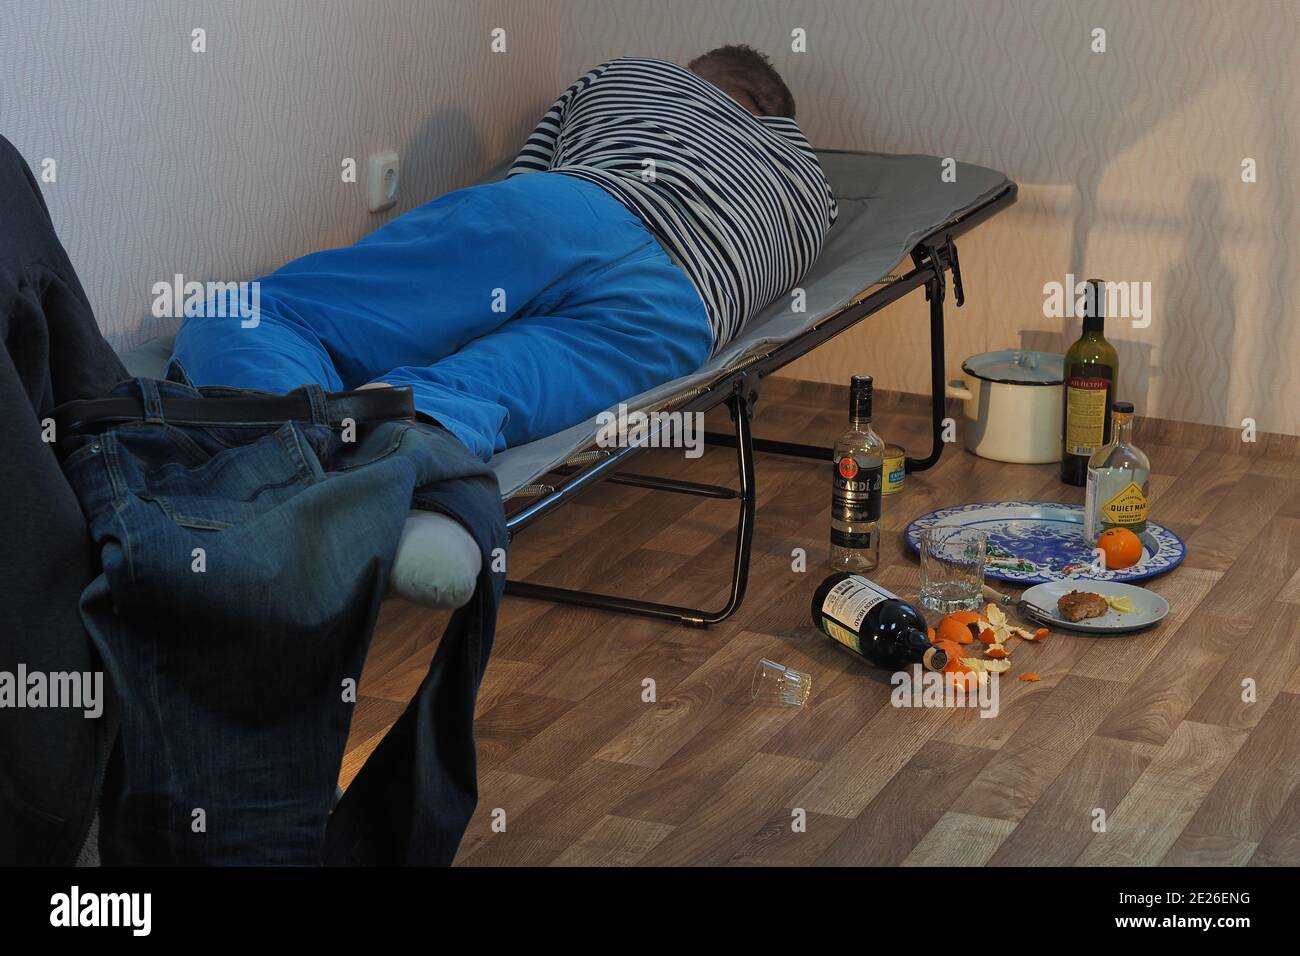 A drunk man lies on a cot and an empty bottle of alcohol is scattered nearby. Stock Photo